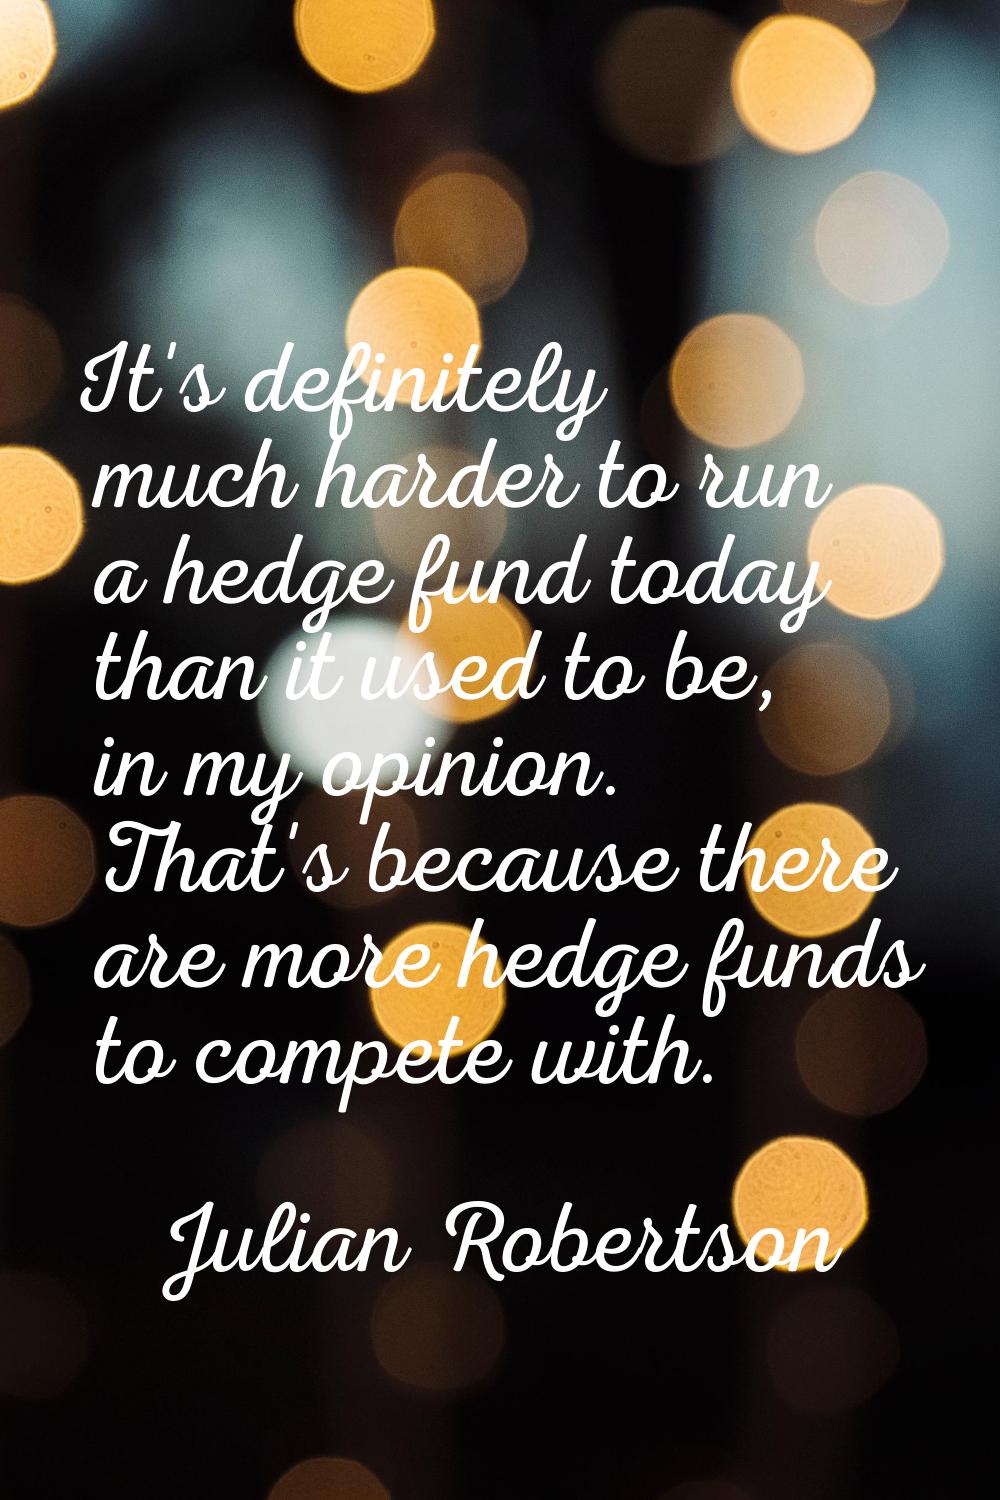 It's definitely much harder to run a hedge fund today than it used to be, in my opinion. That's bec